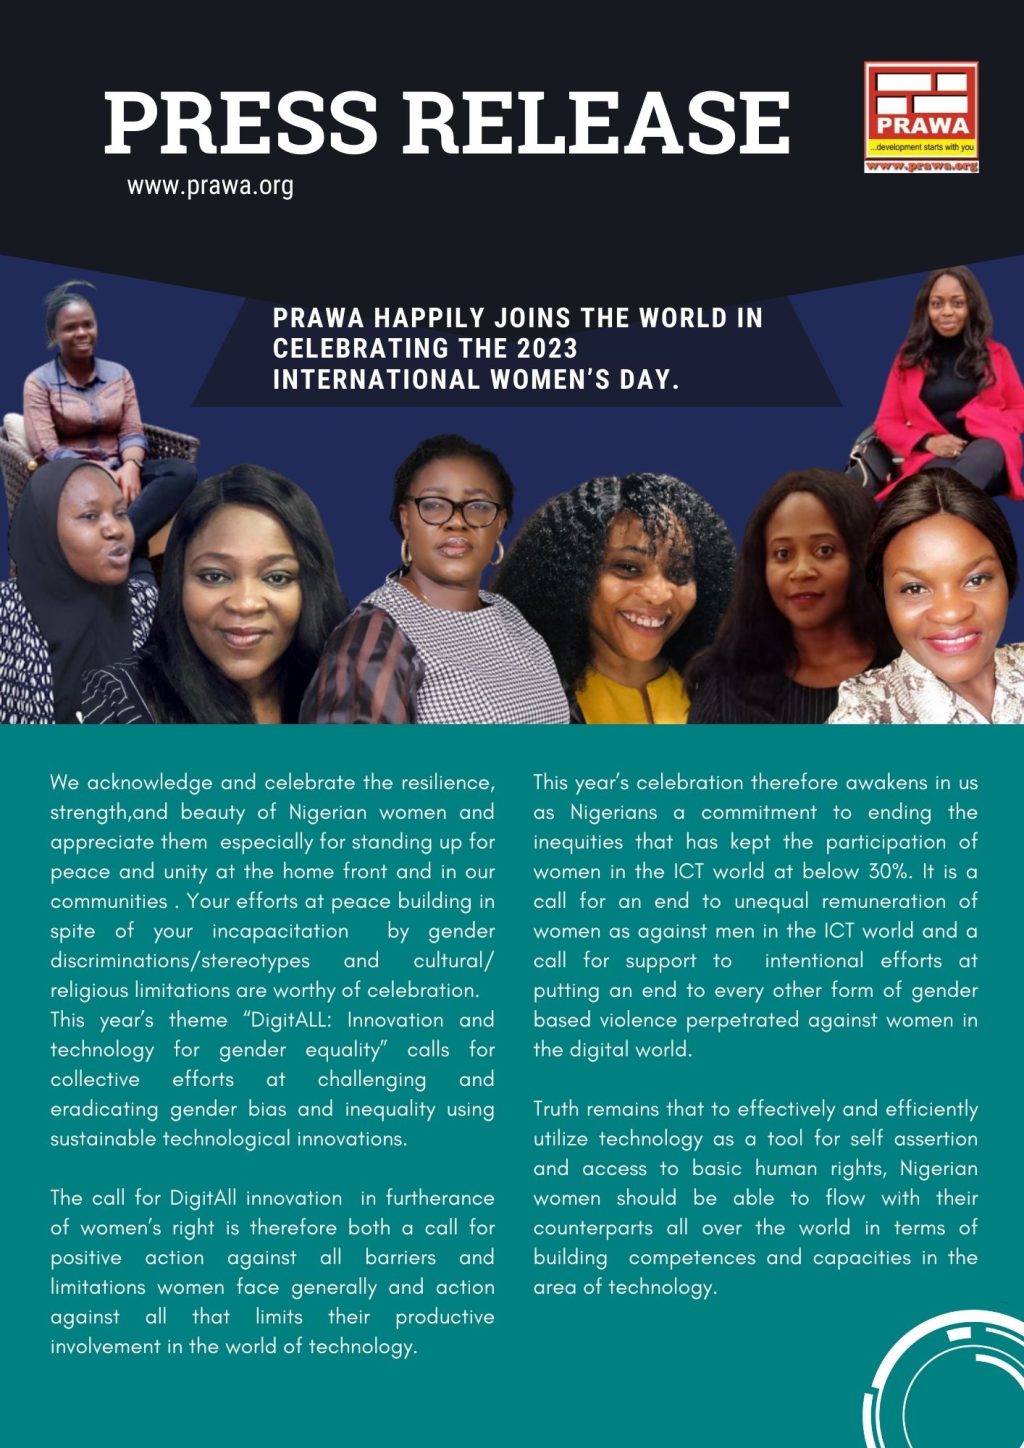 PRAWA happily joins the world in celebrating the 2023 International Women’s Day.